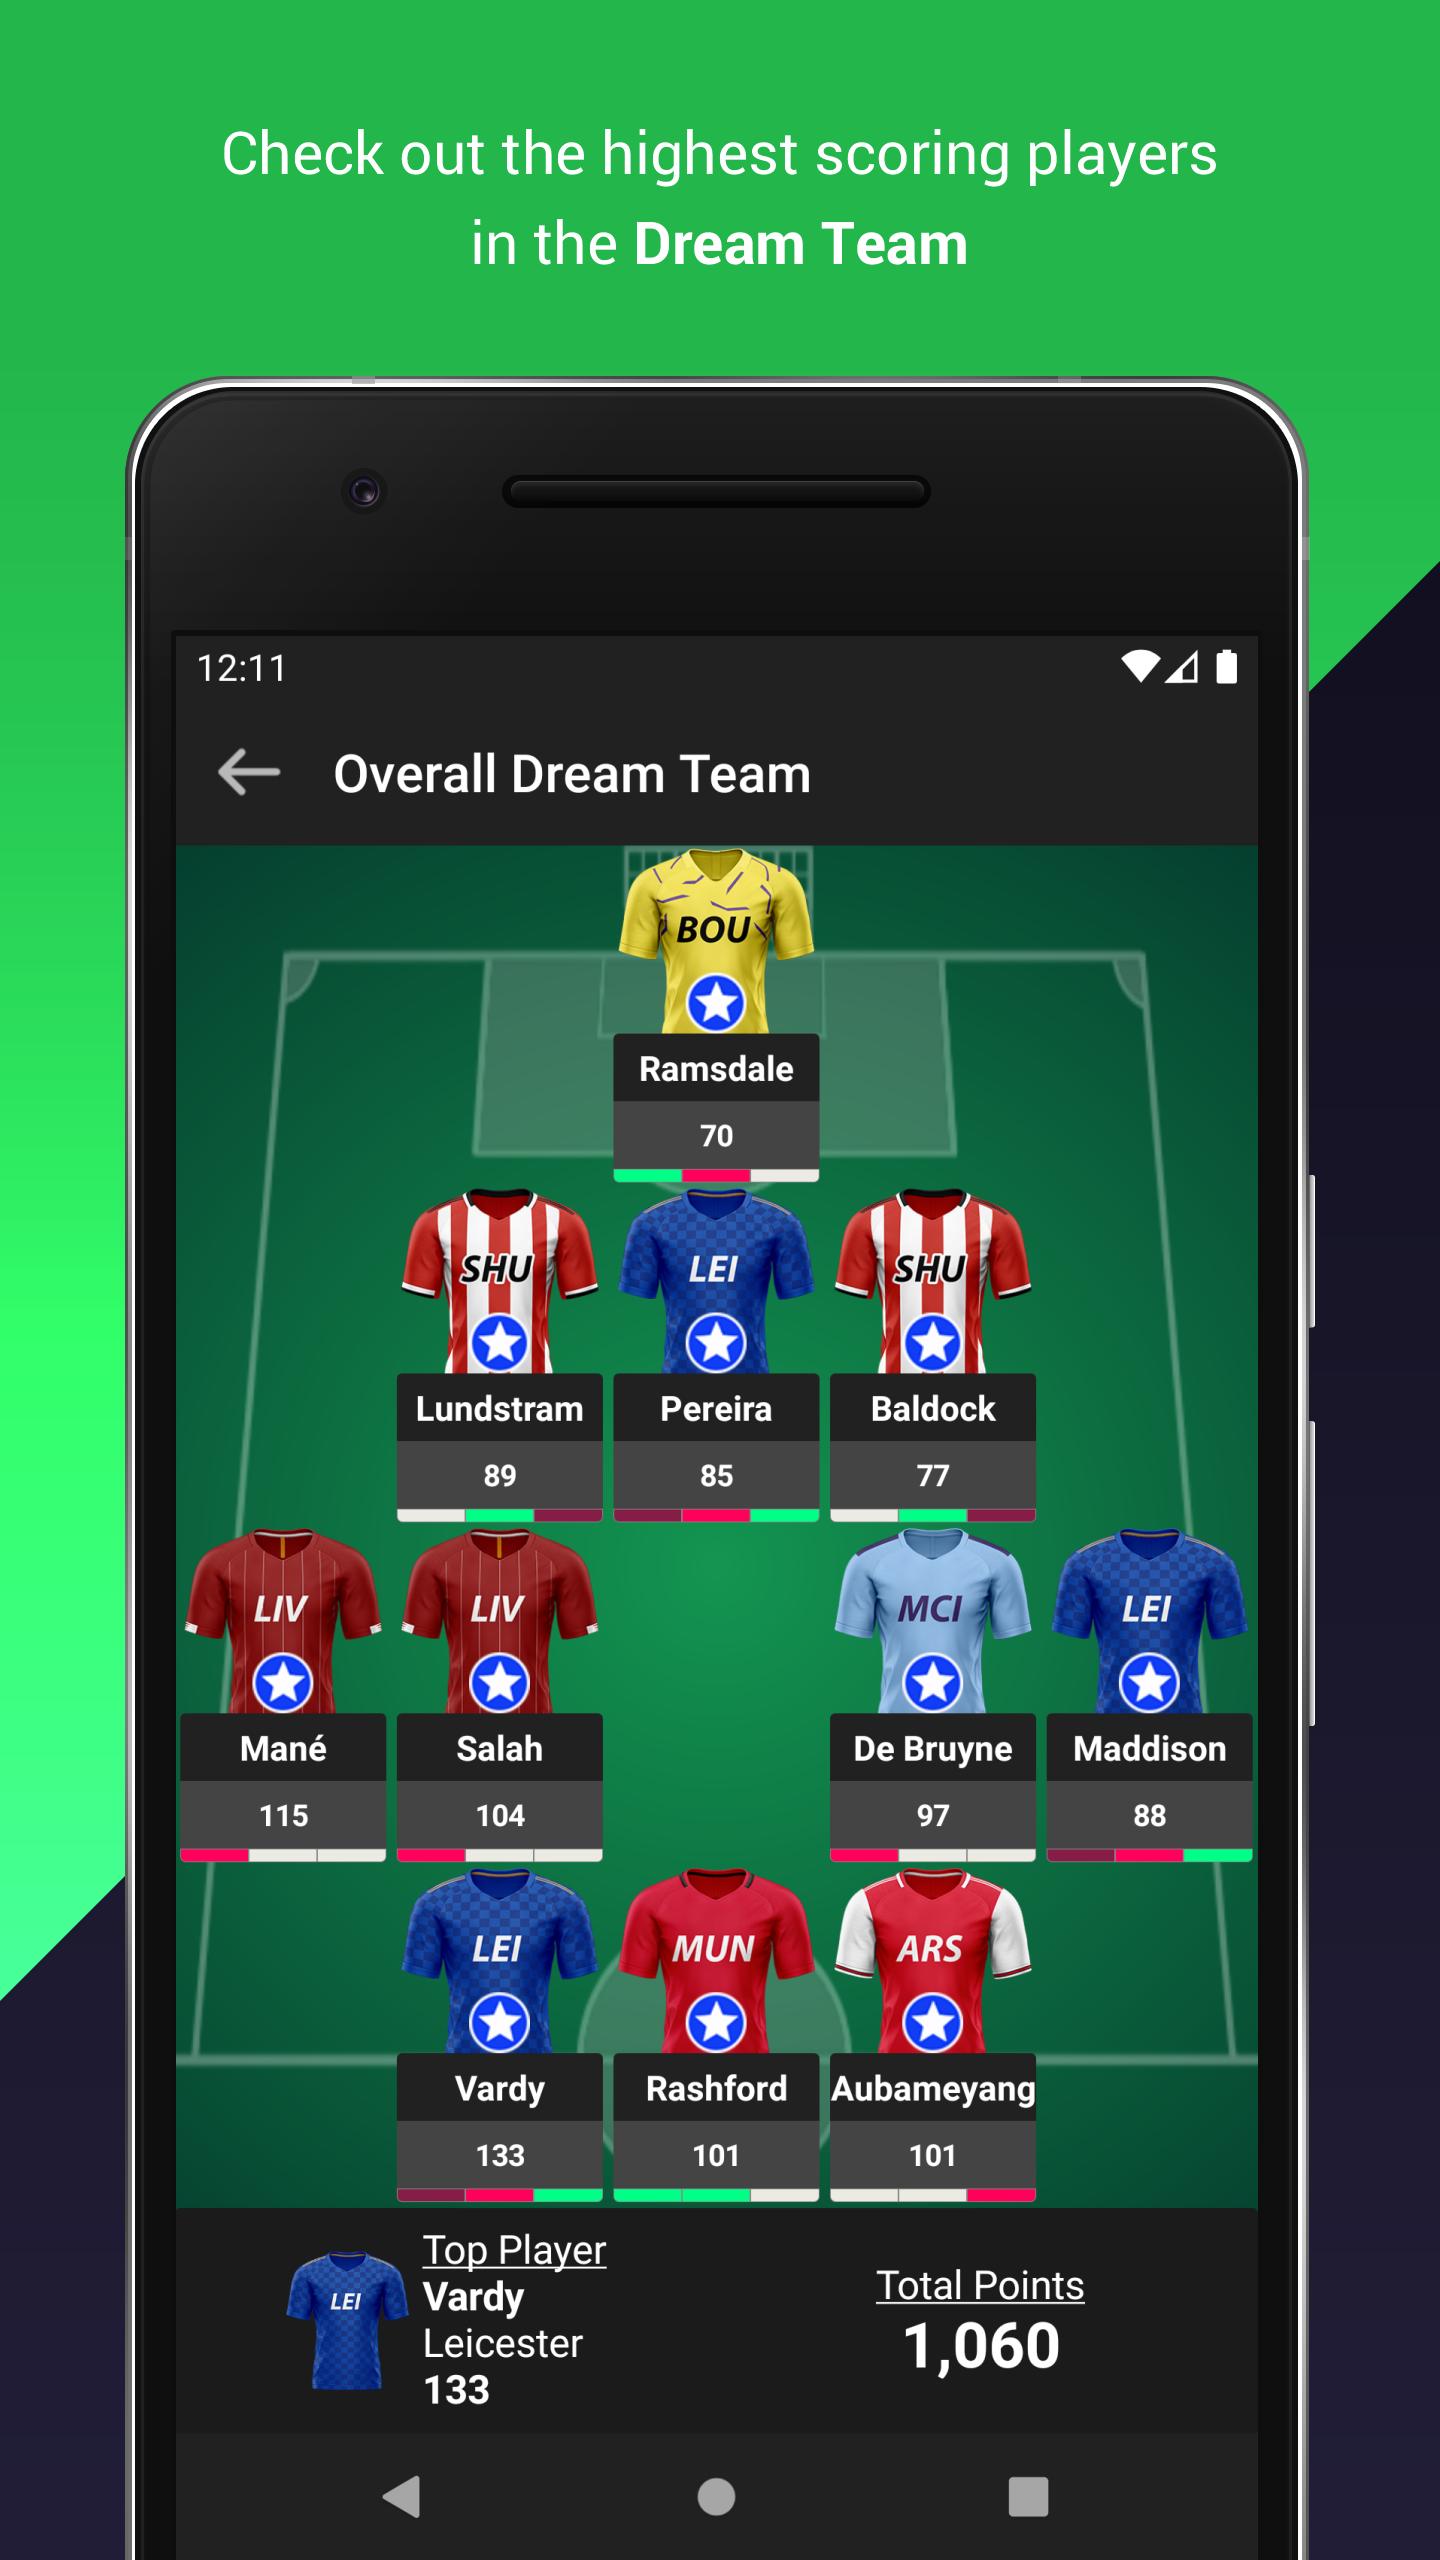 Fantasy Football Manager for Premier League (FPL) for Android - APK Download